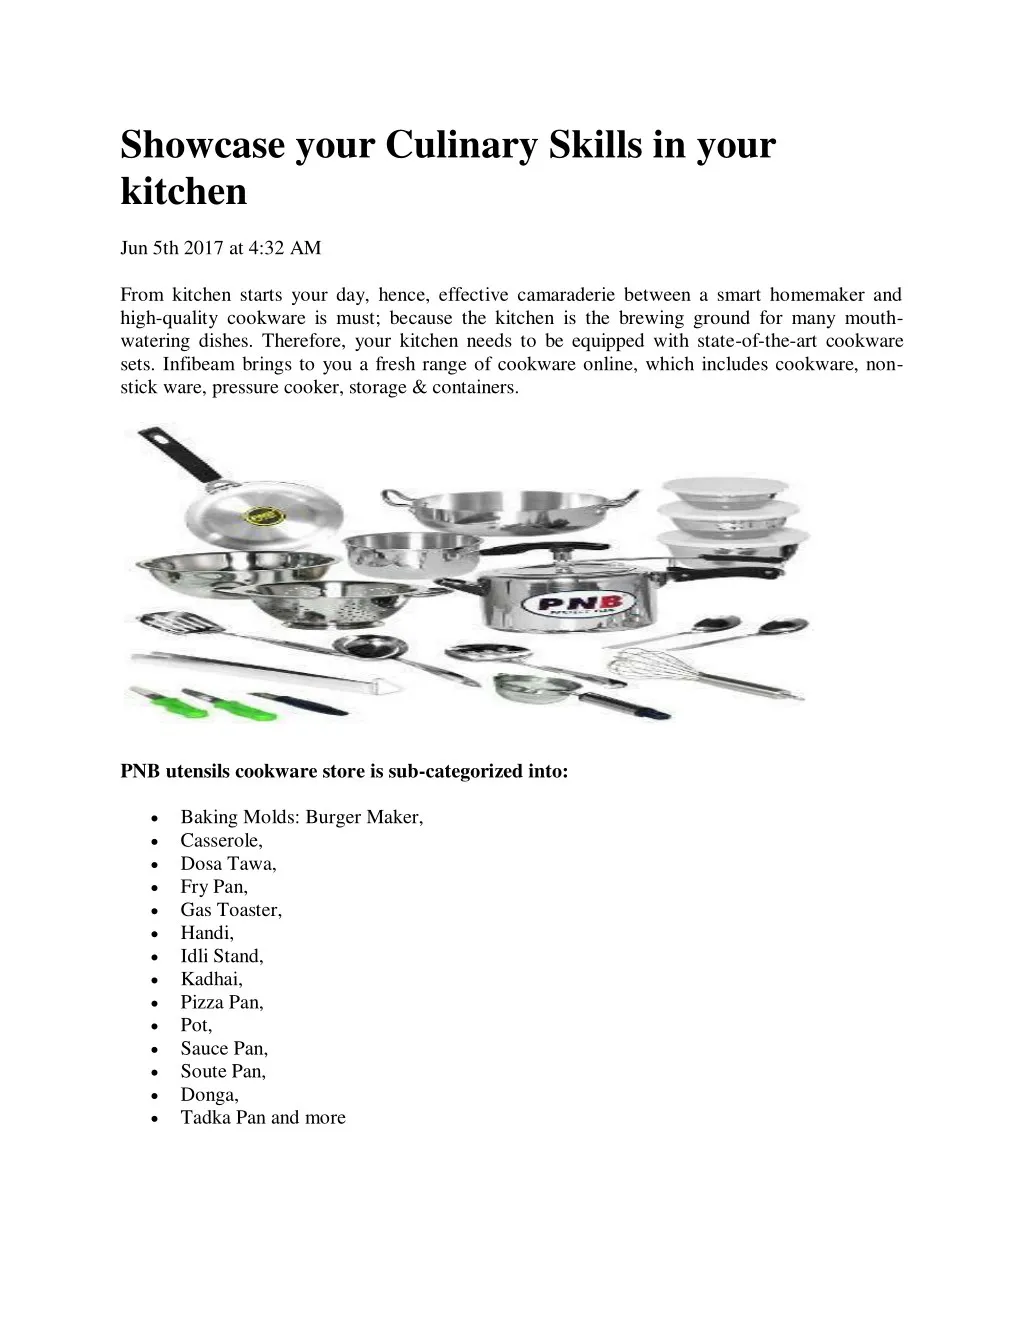 showcase your culinary skills in your kitchen